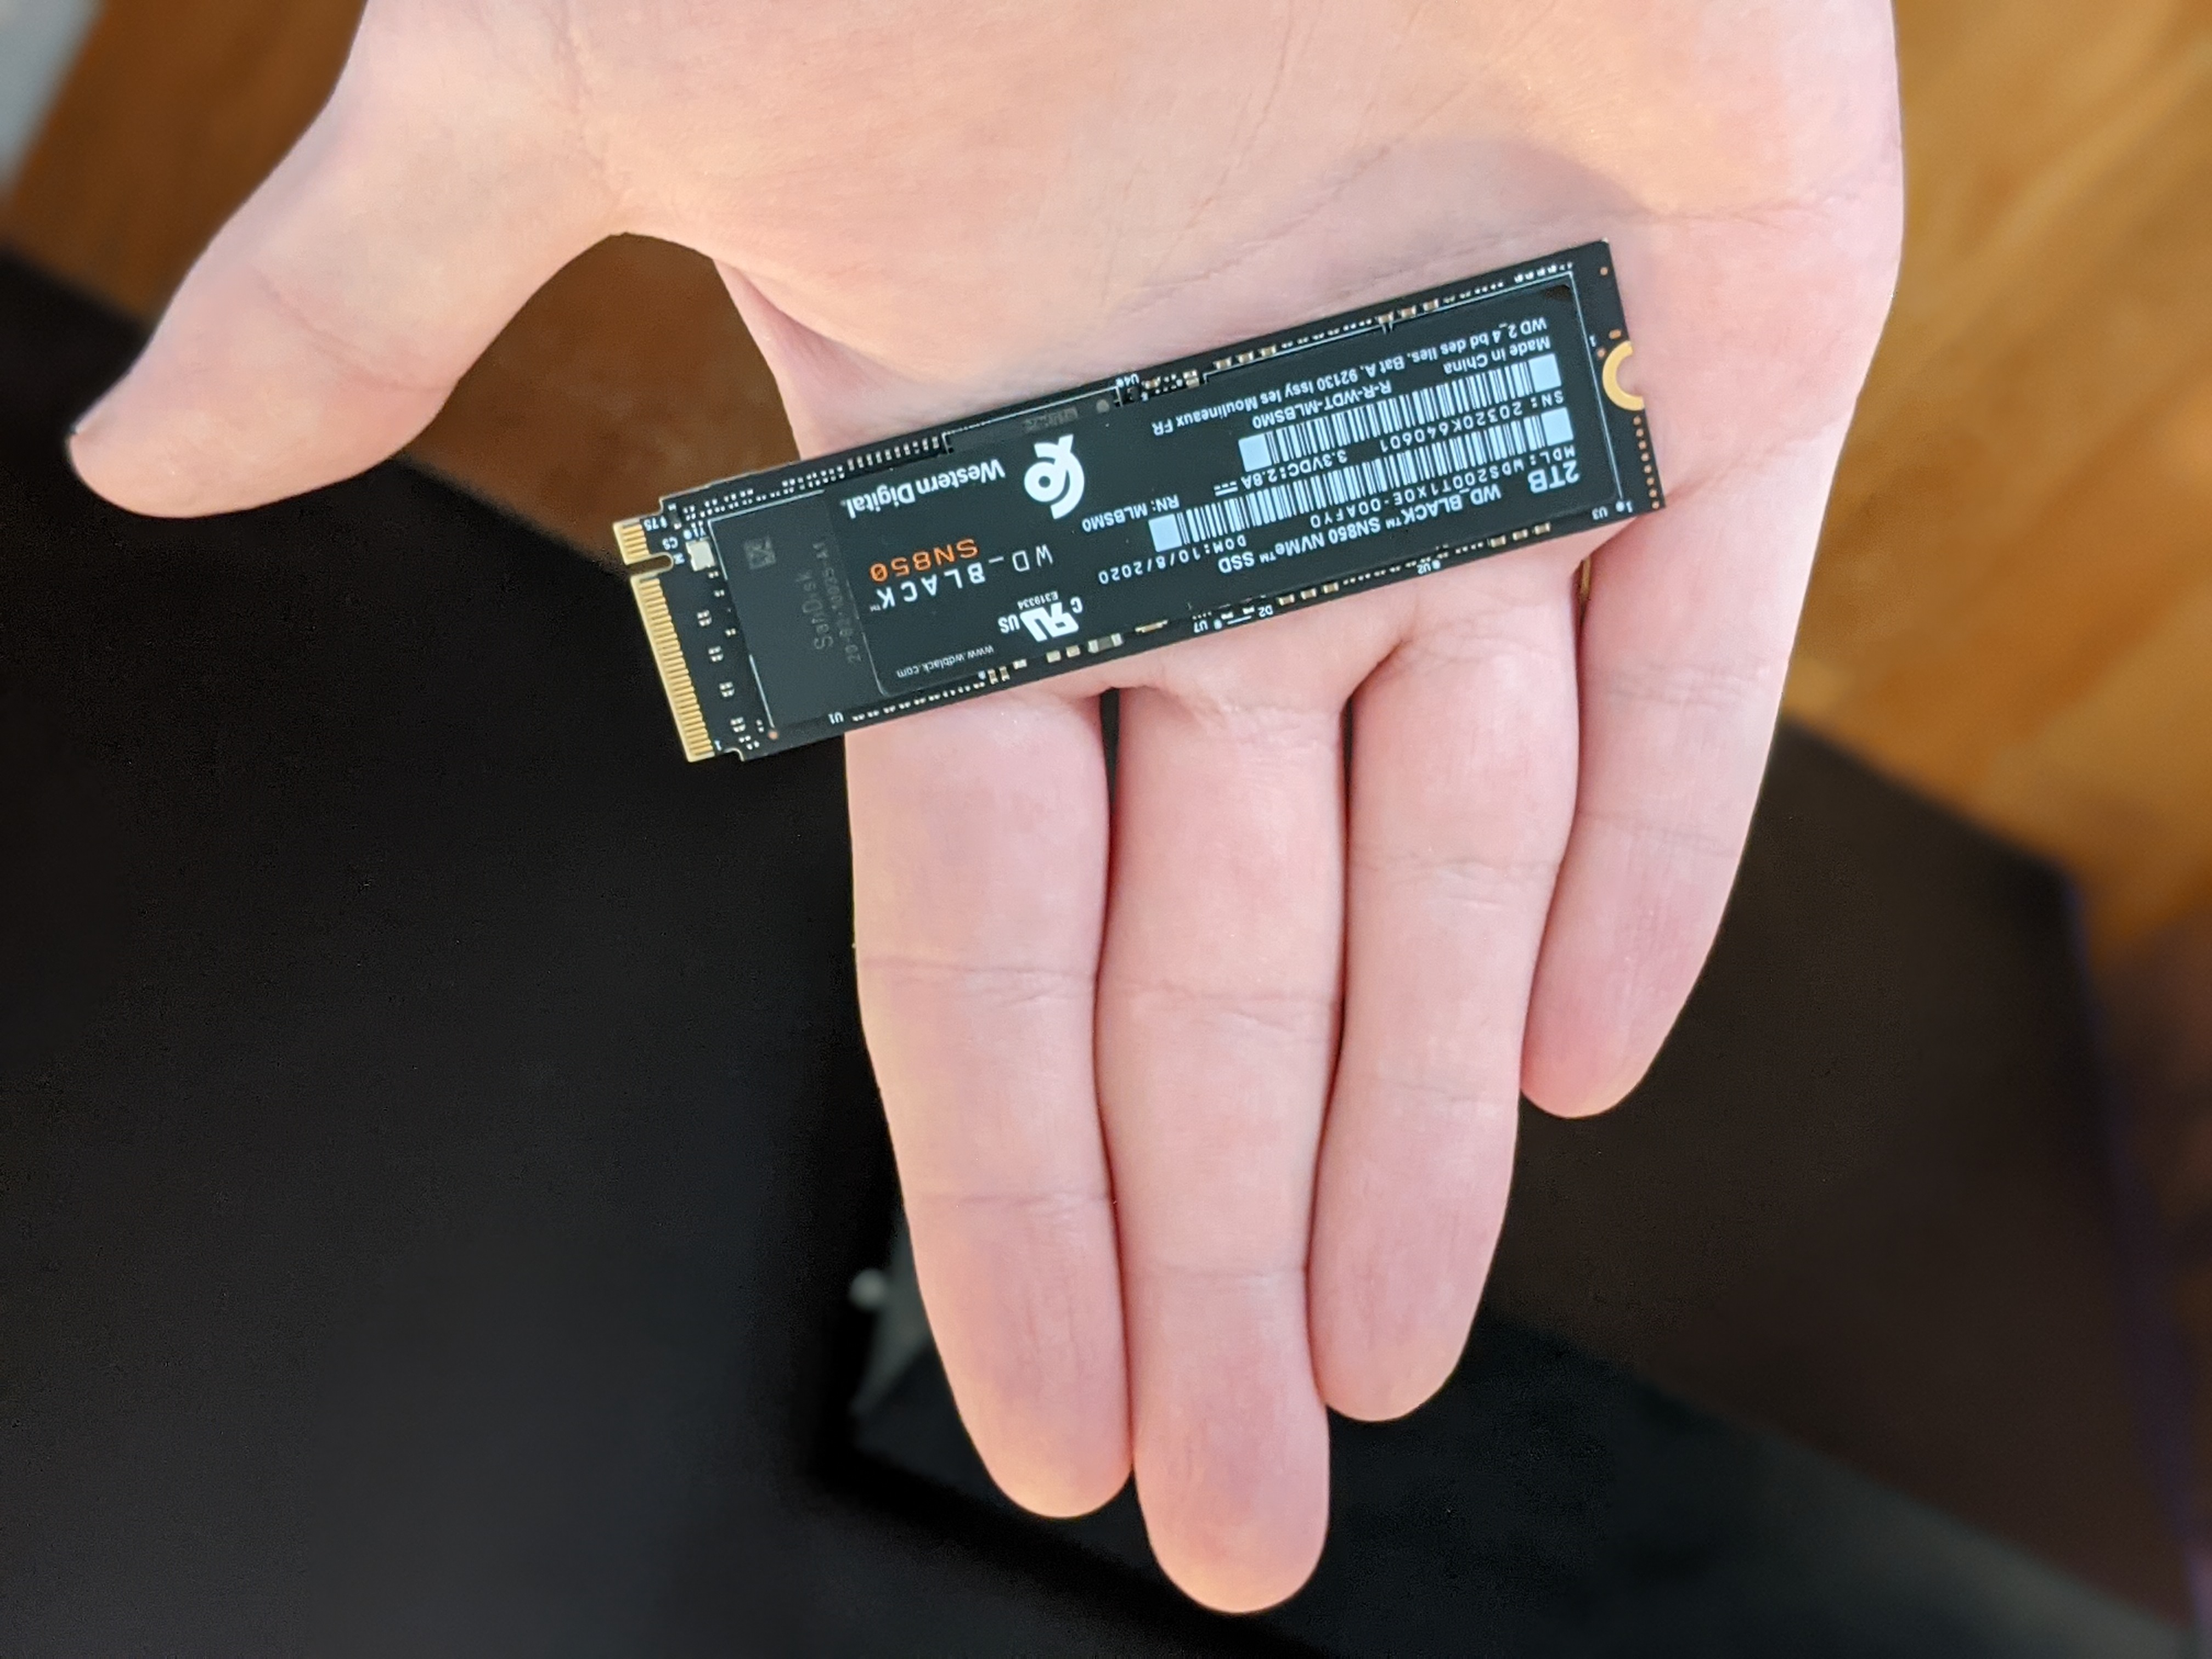 How to install an M.2 SSD |